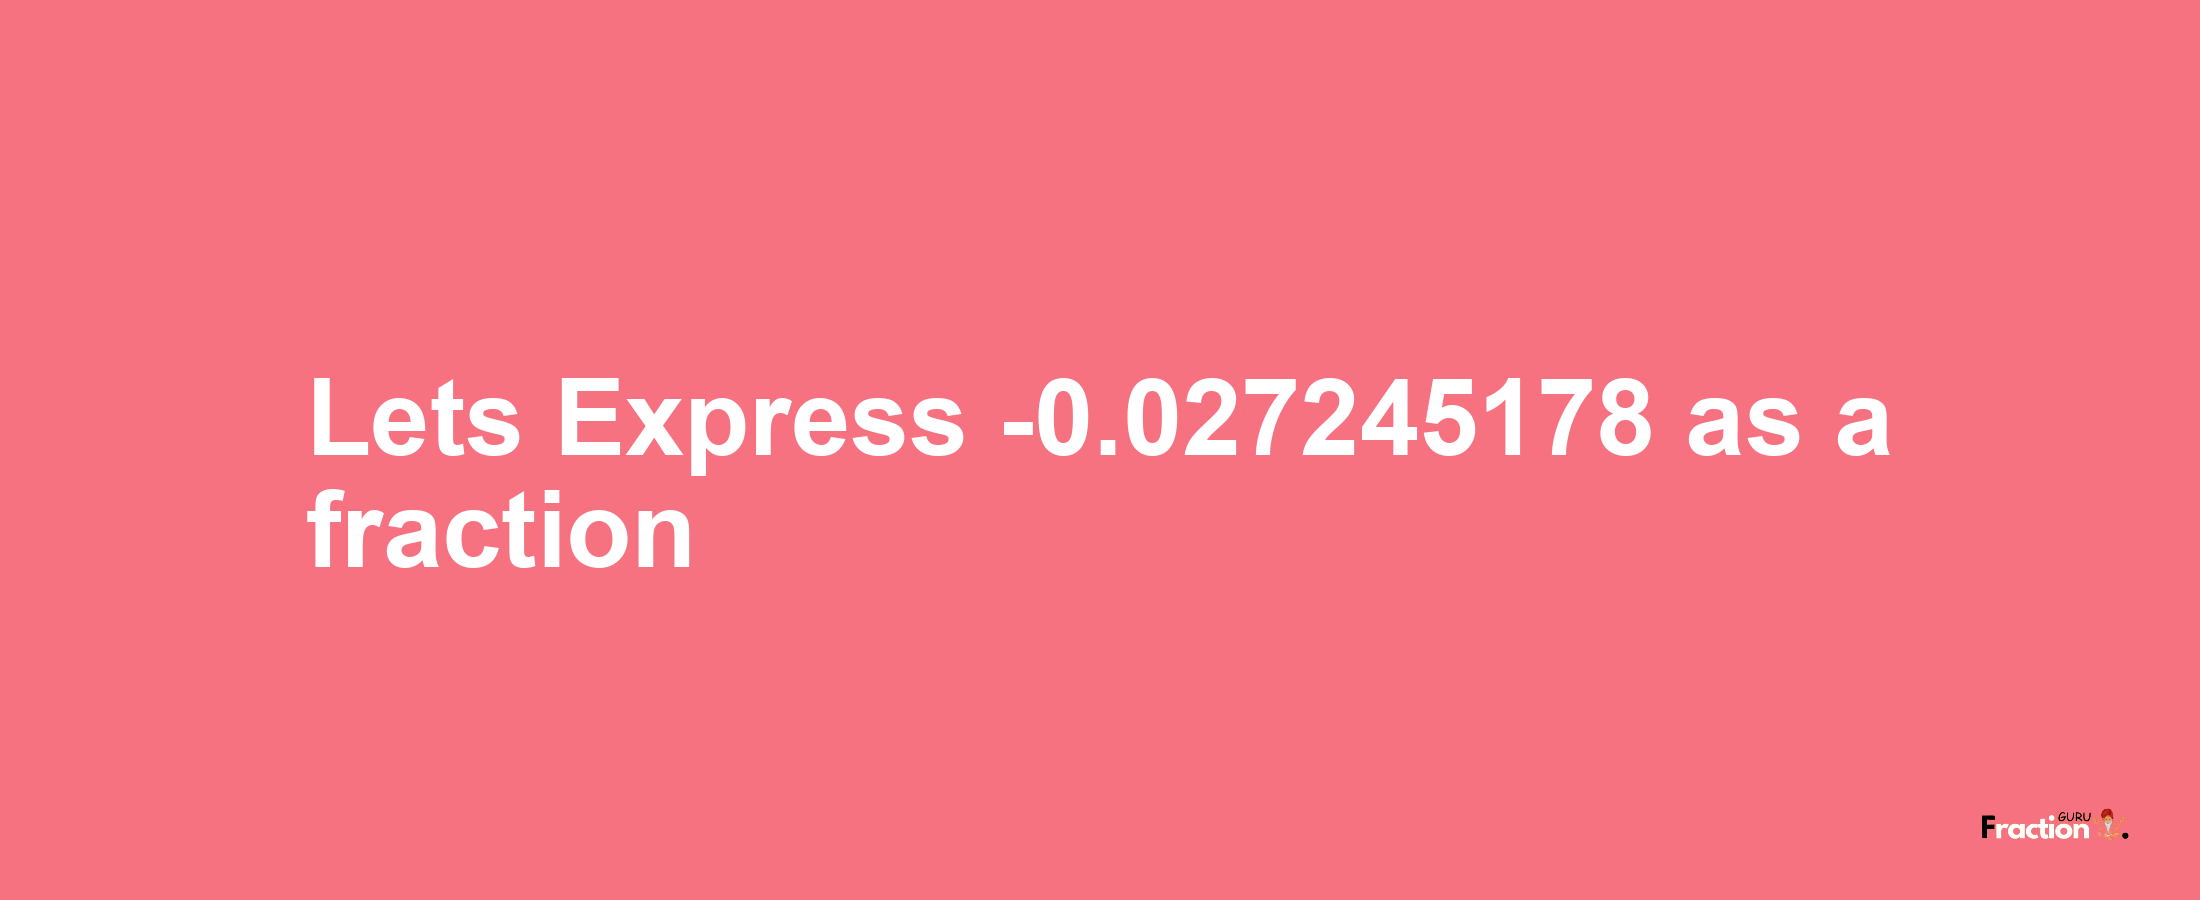 Lets Express -0.027245178 as afraction